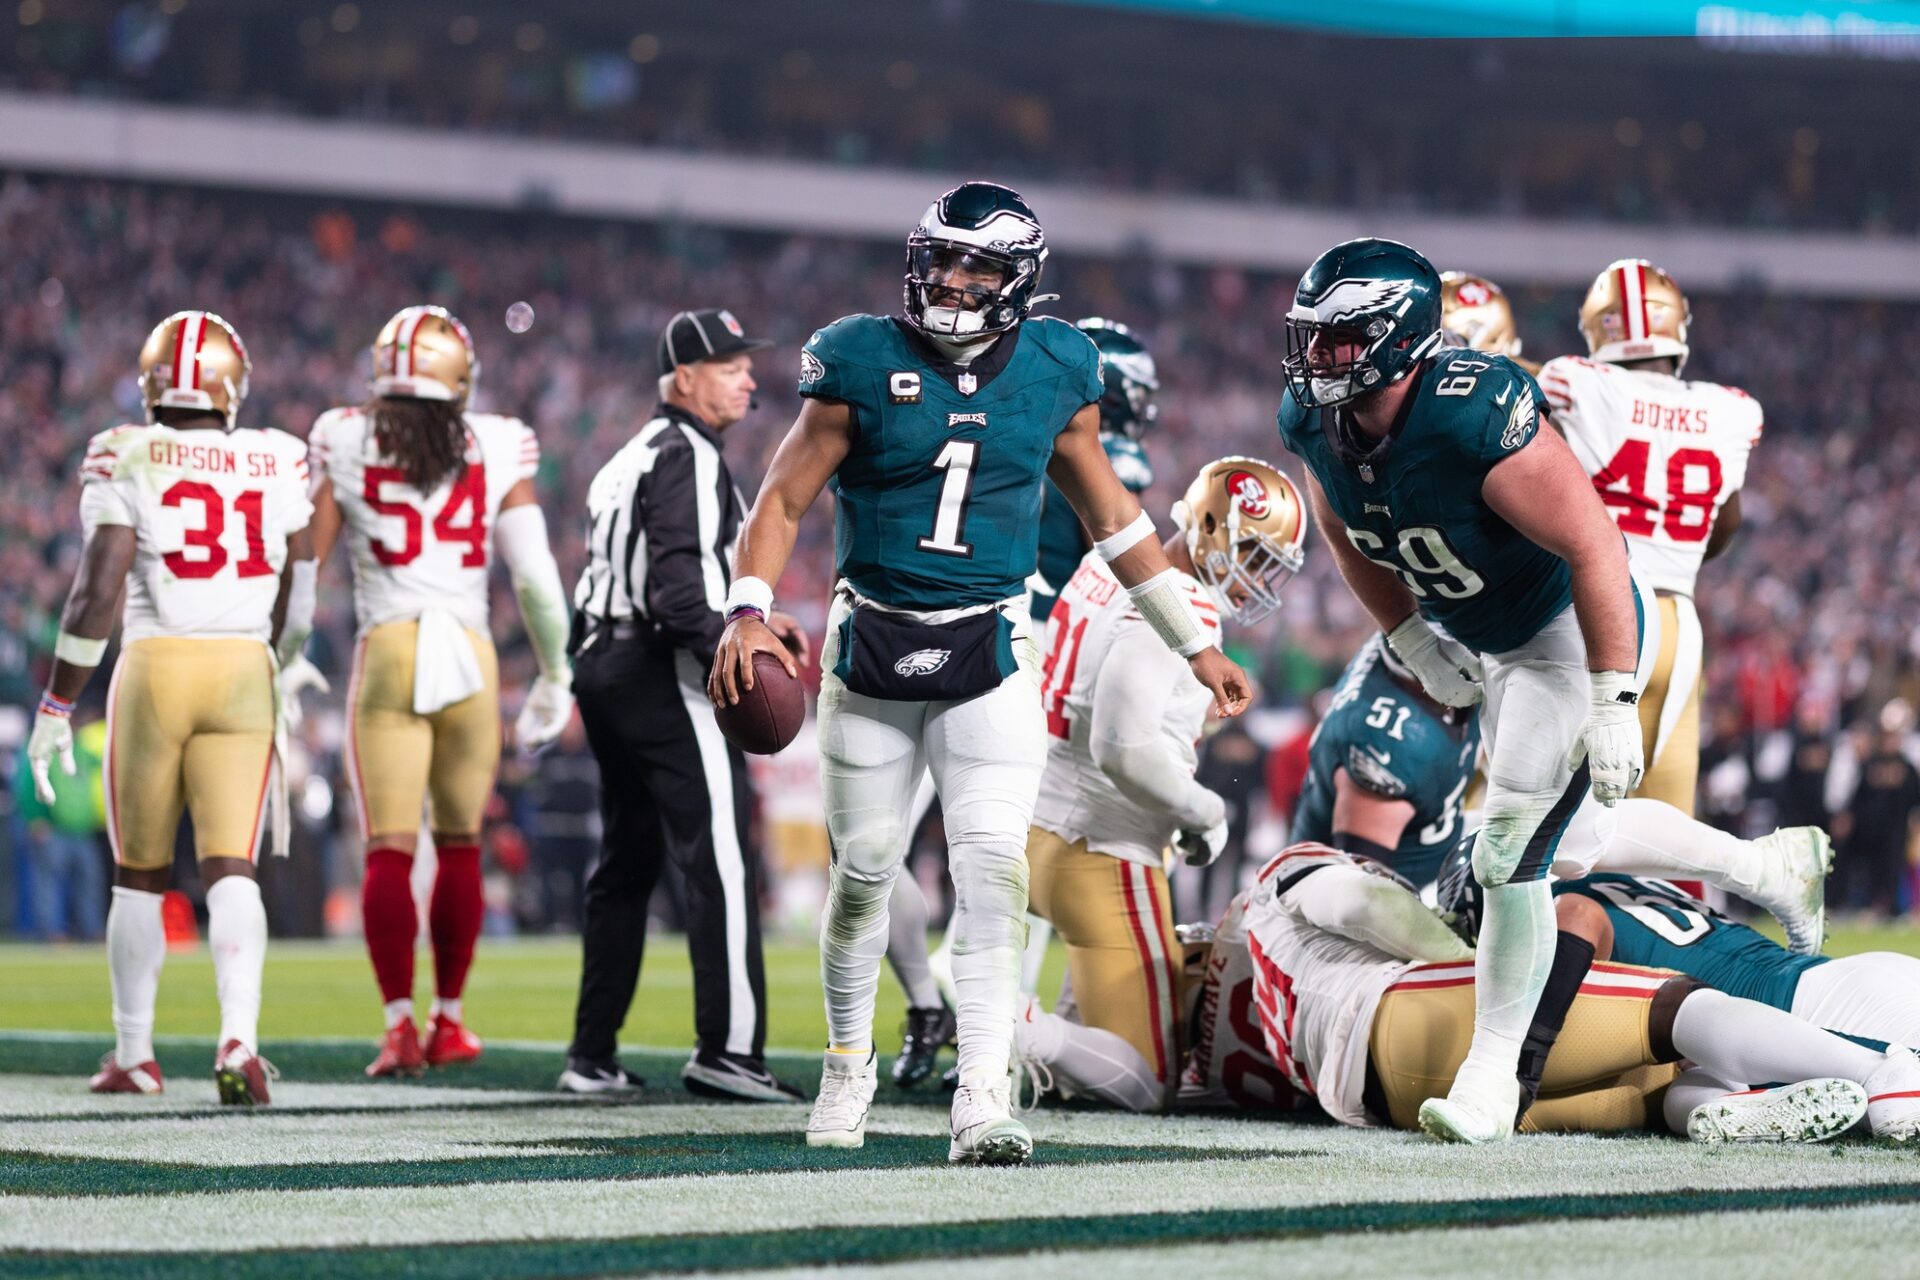 Philadelphia Eagles quarterback Jalen Hurts (1) reacts after scoring a touchdown against the San Francisco 49ers during the third quarter at Lincoln Financial Field.